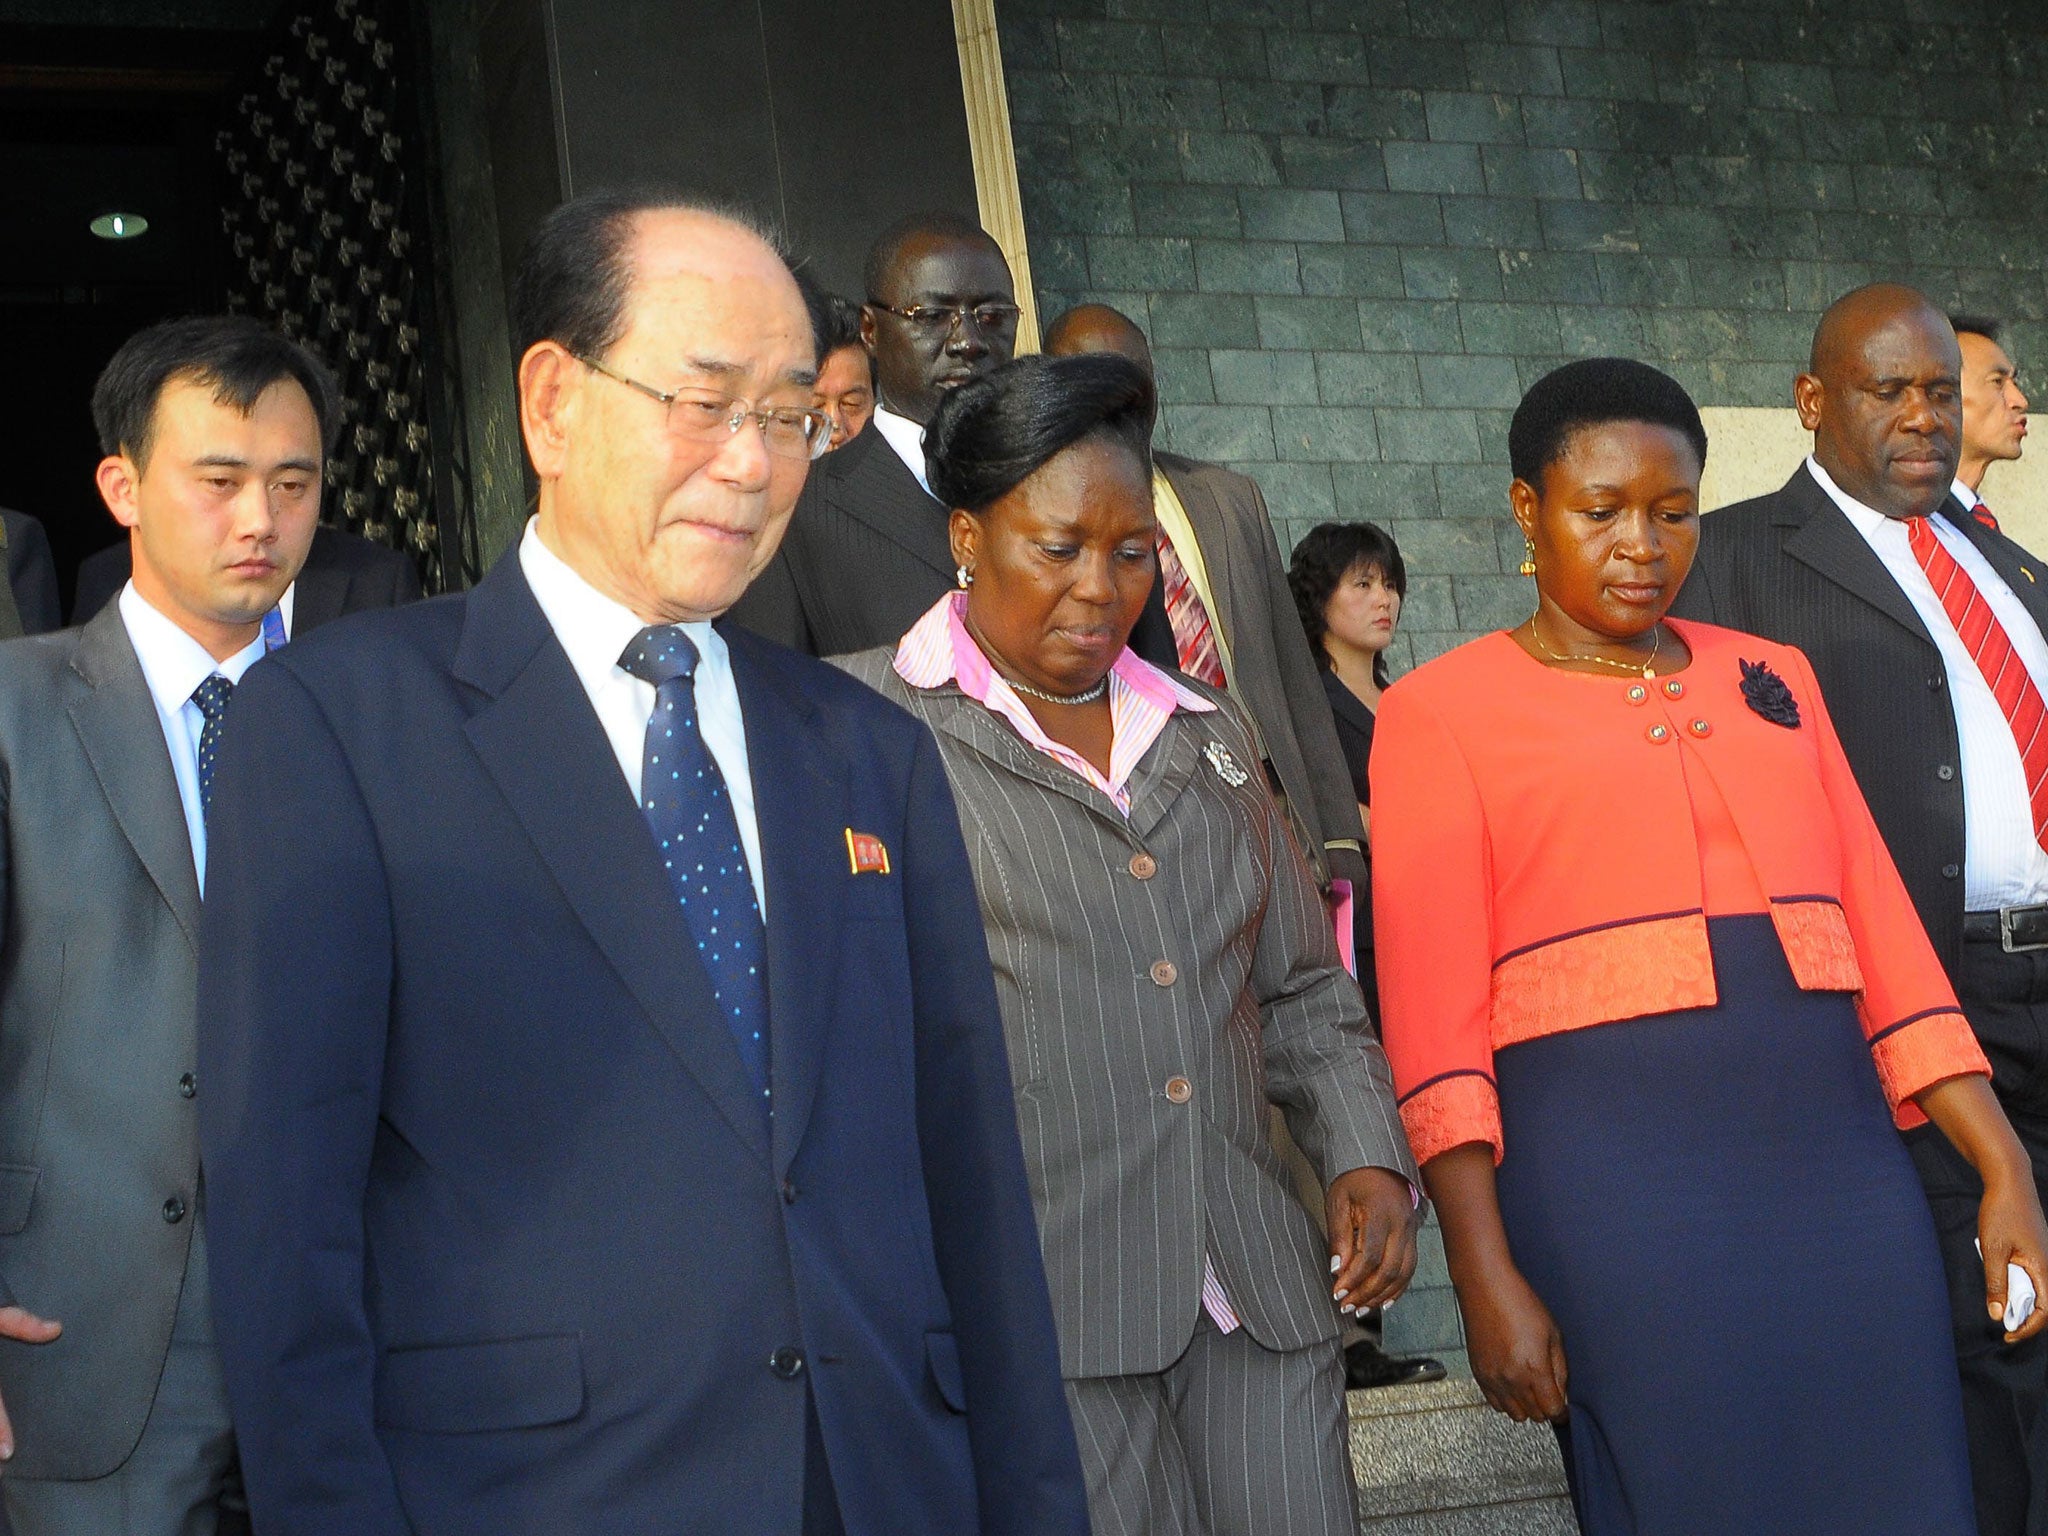 Kim Yong Nam, foreground-left, is visiting Uganda as part of a rare tour of Africa, where North Korea has actively tried to find allies like the long-serving Ugandan President Yoweri Museveni, who gave a state dinner in honor of Kim Yong Nam and commended